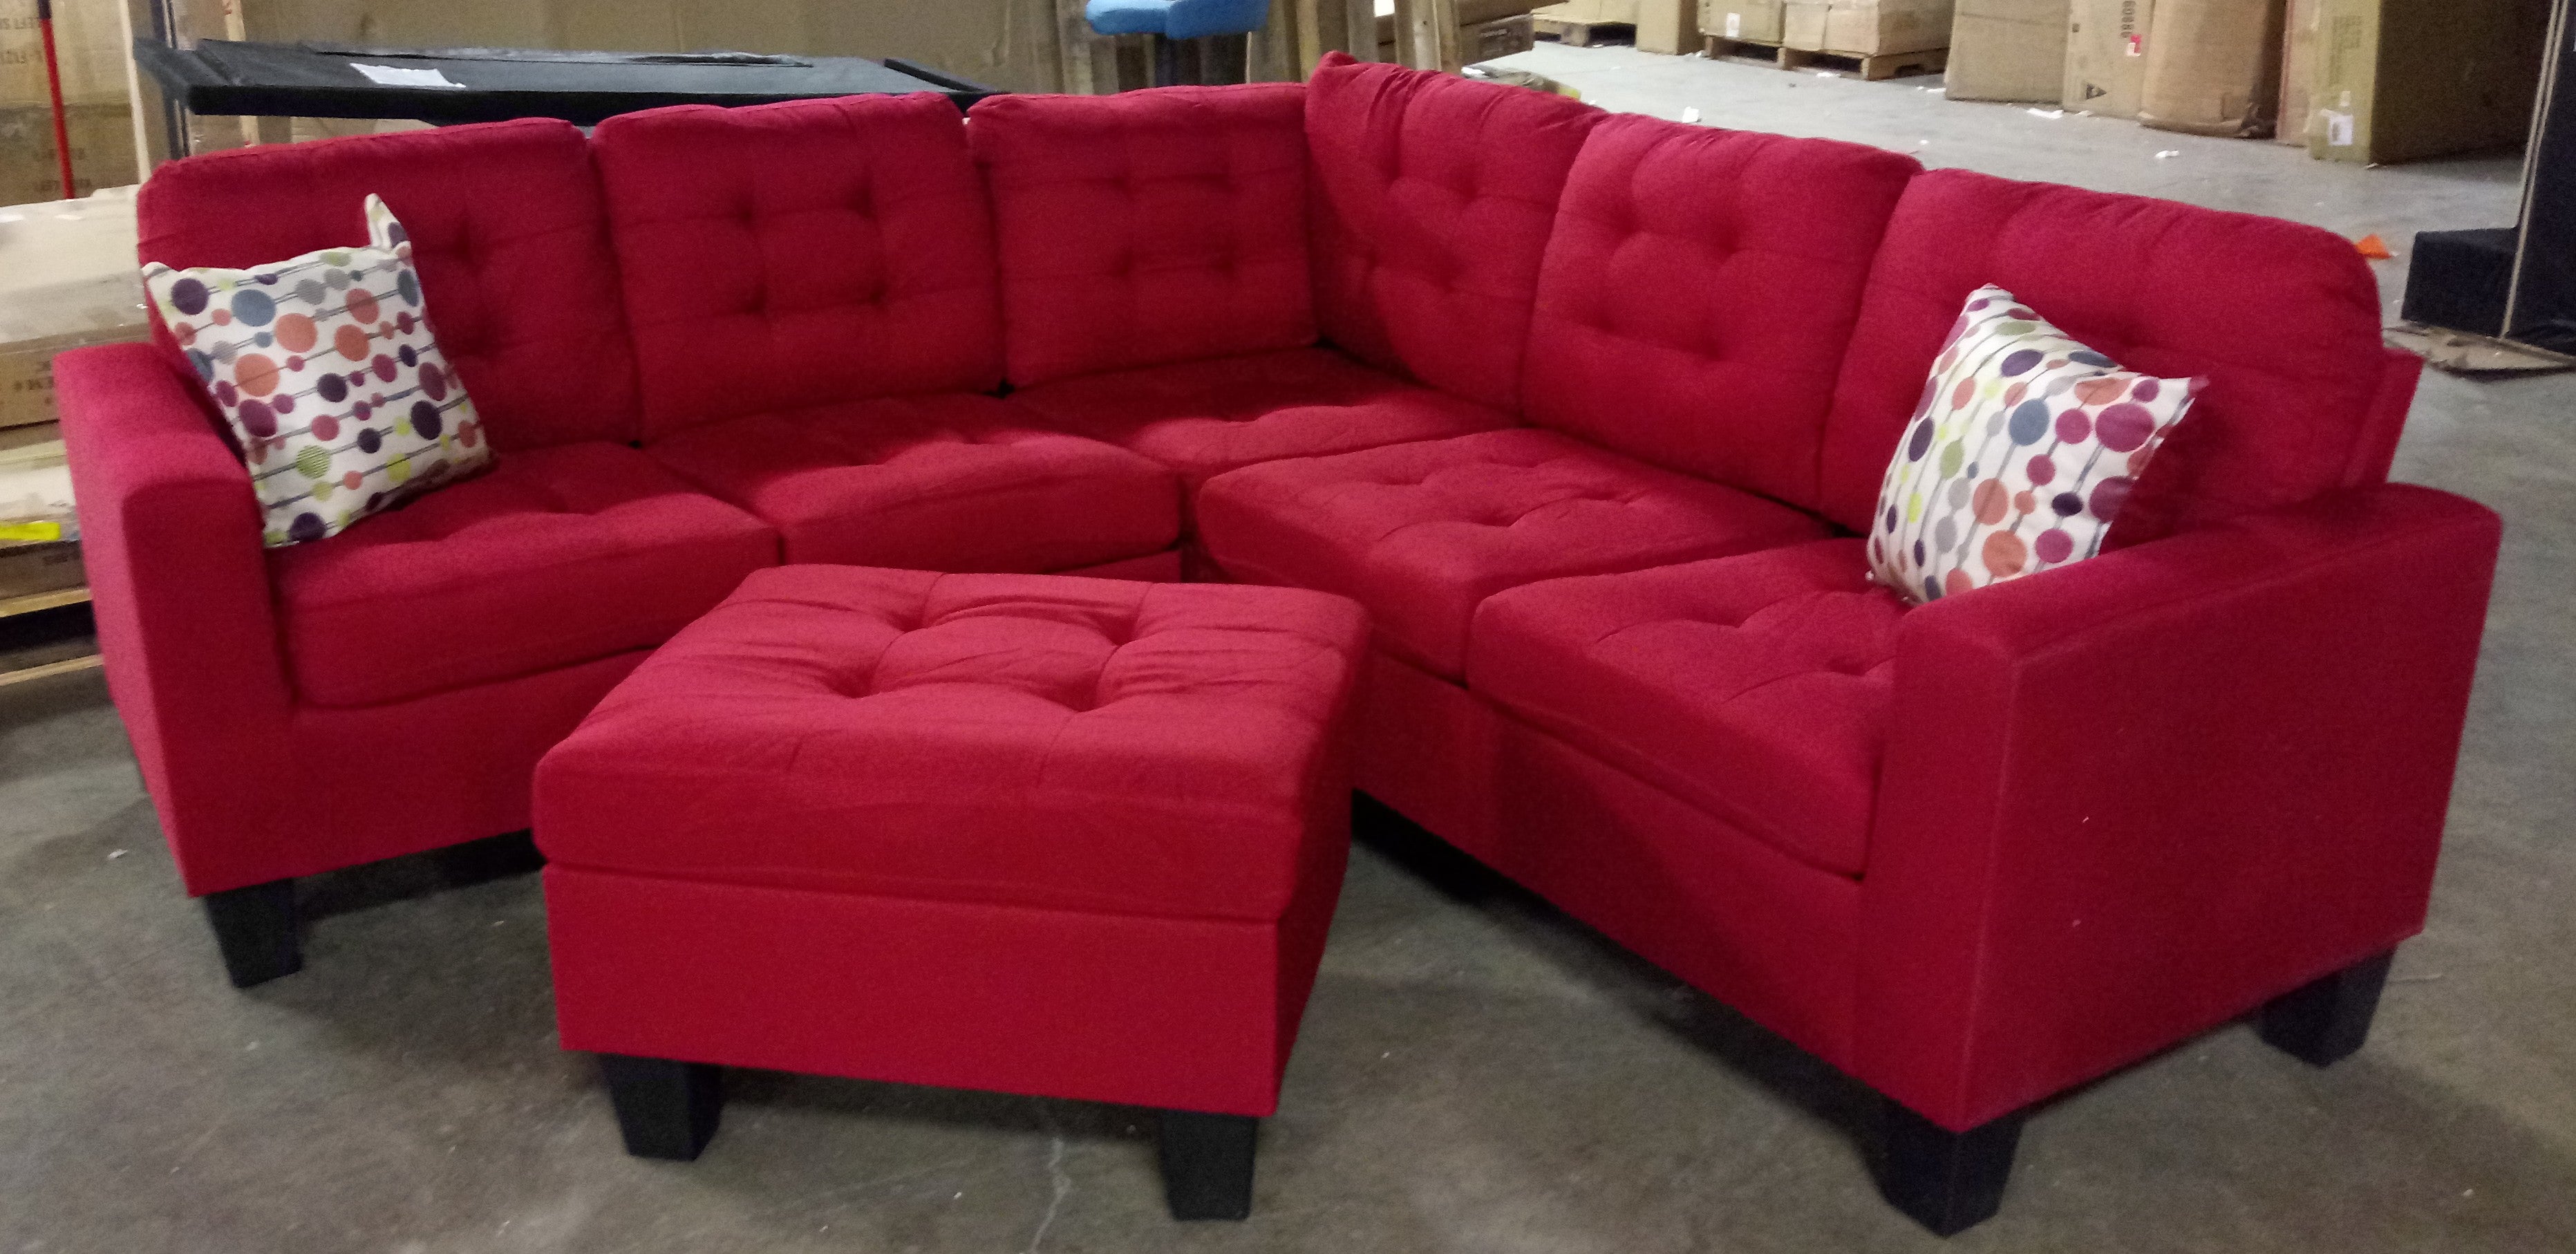 Pawnee 84" Left Hand Facing Corner Sectional with Ottoman